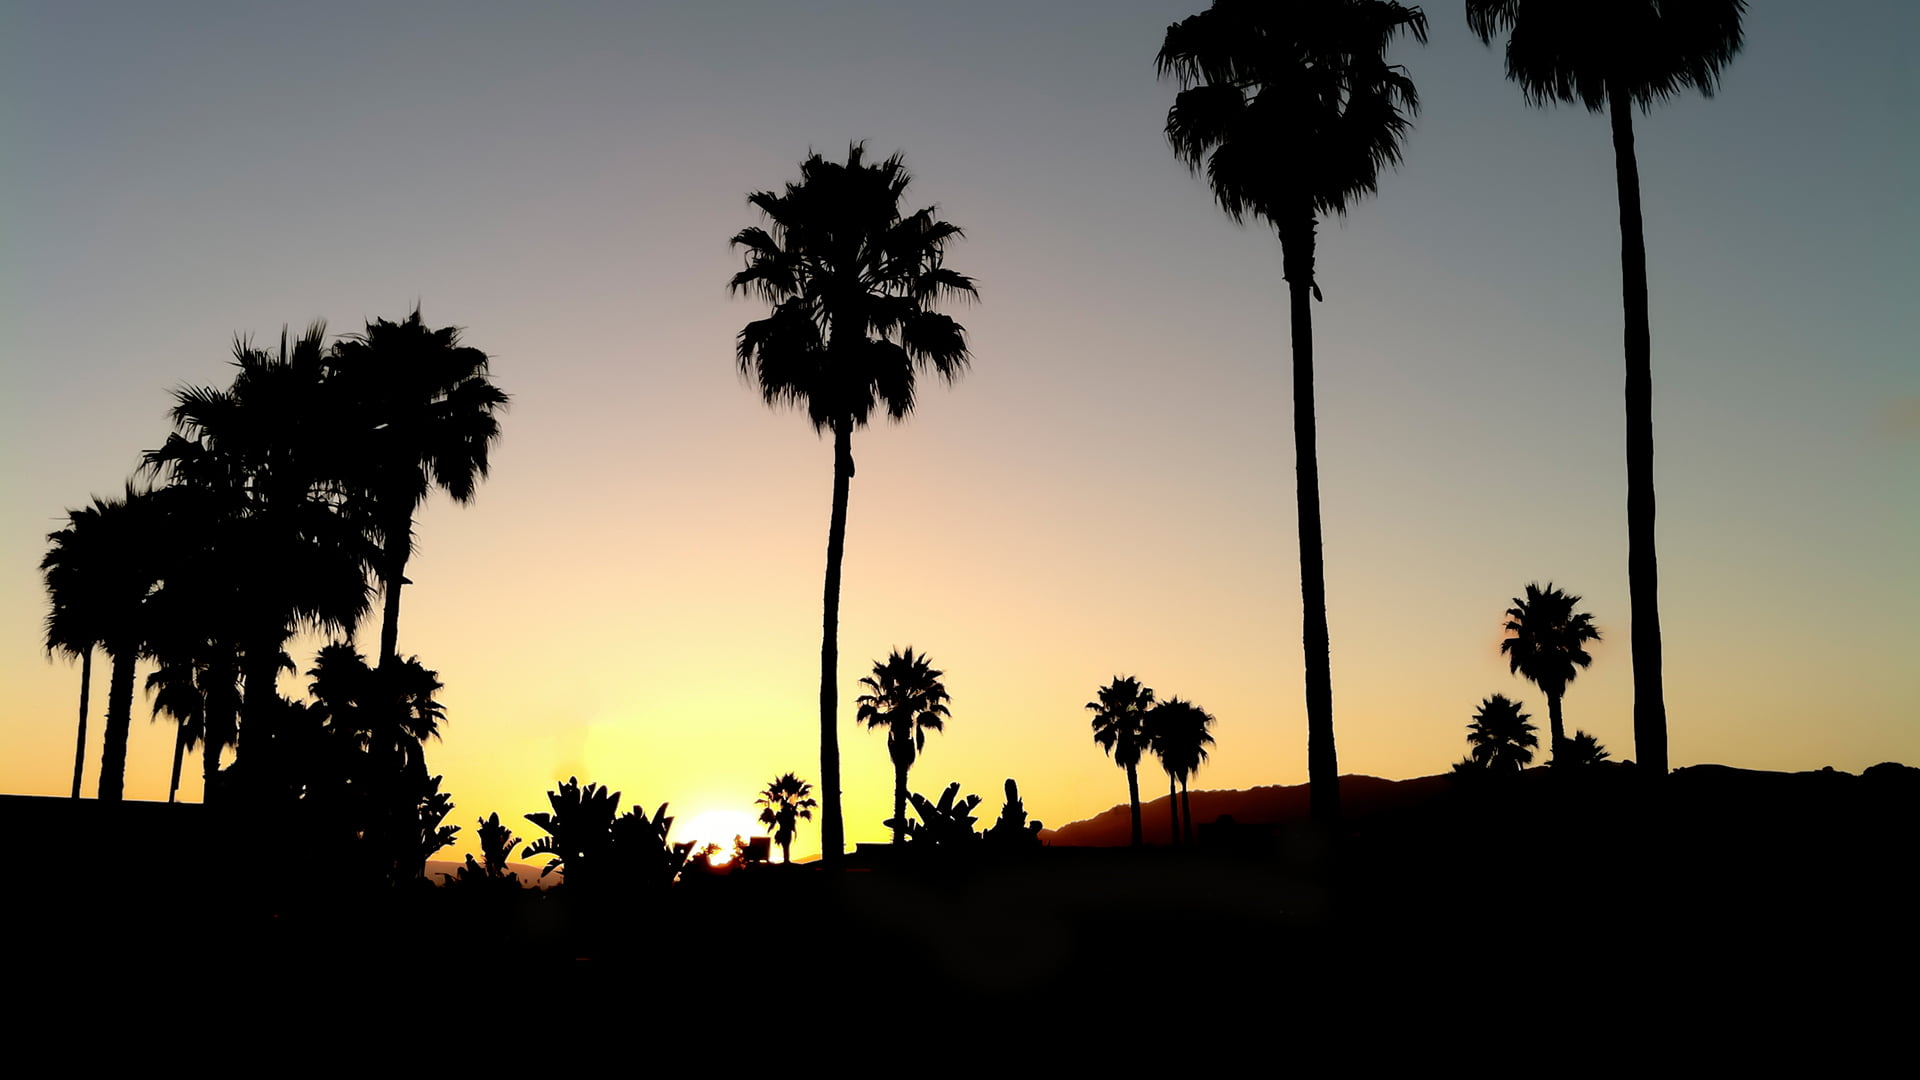 silhouette of trees during golden hour, sunset, black, palm trees, silhouette